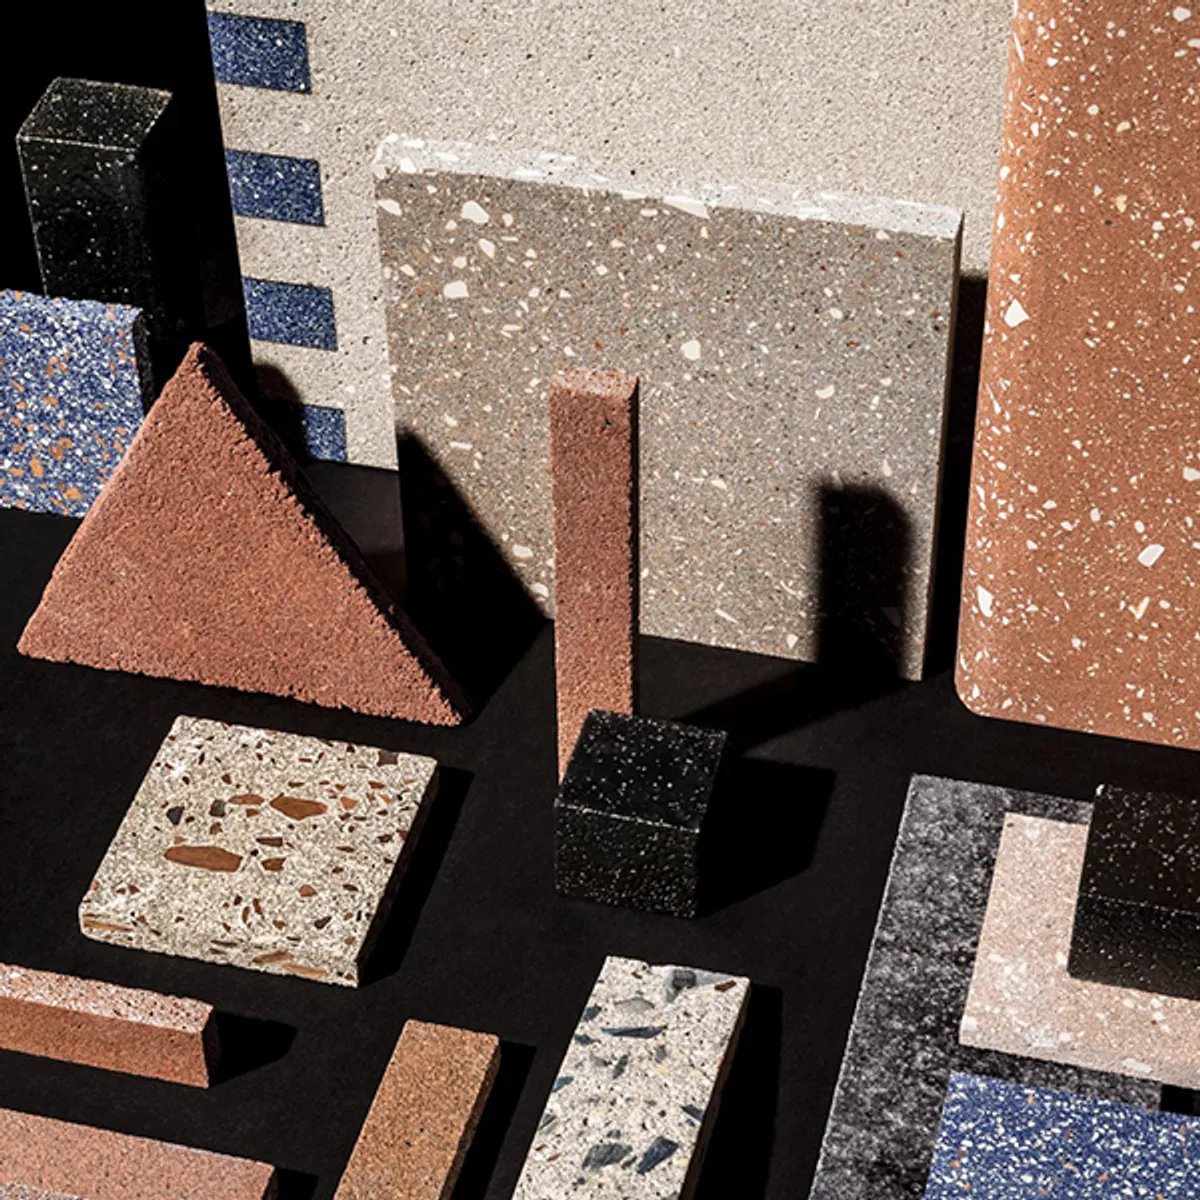 Silicastone Samples Terracotta Beige Moodboard Inside Out Contracts